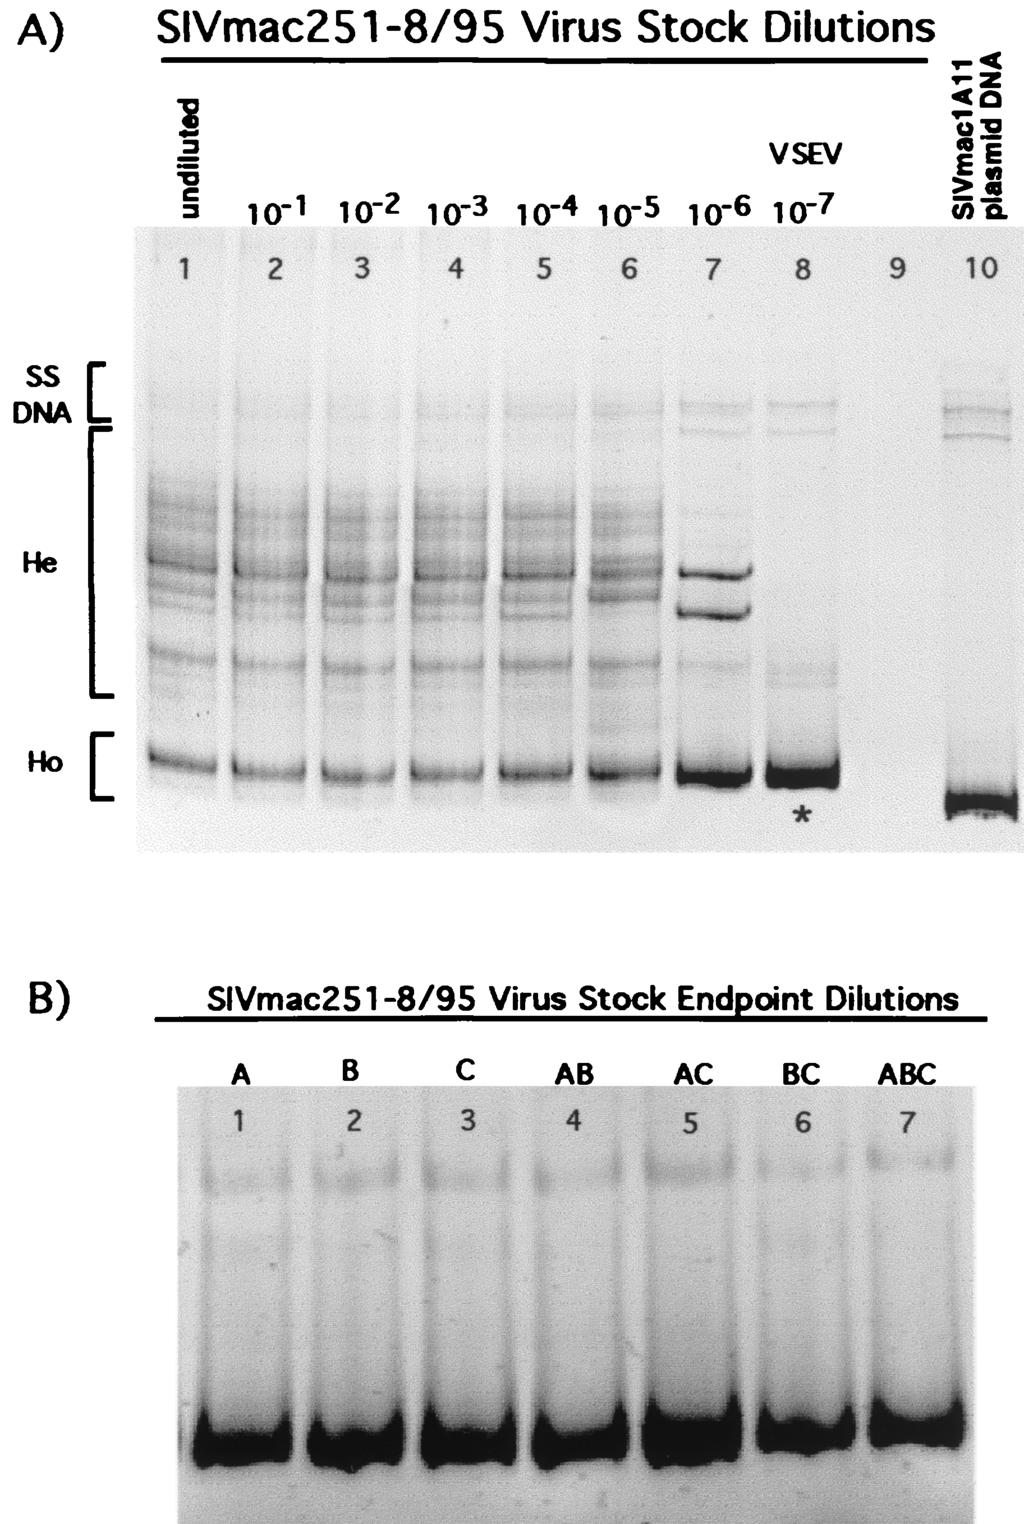 VOL. 75, 2001 TRANSMISSION OF SIV VARIANTS 3755 amplified fragments that produce a single homoduplex band are 98 to 100% identical in nucleotide sequence (2).